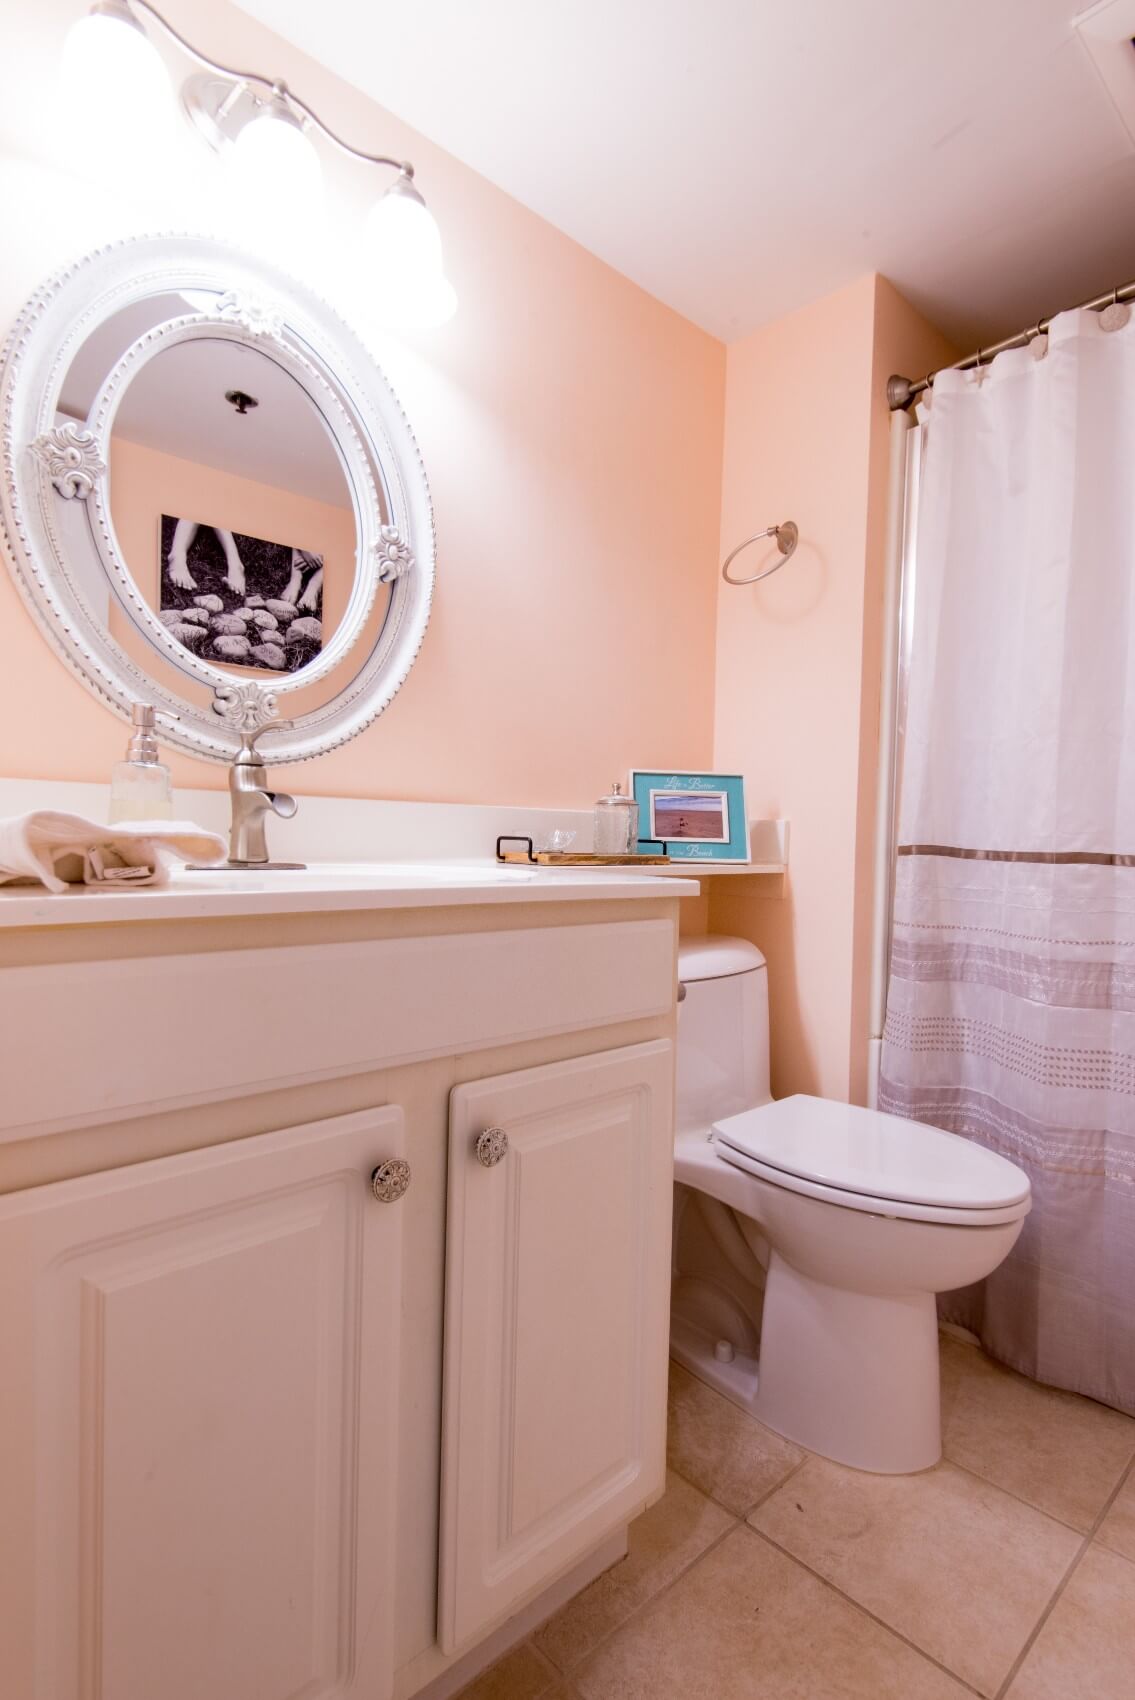 Sea Colony Condo Renovation Peach Color Bathroom with White Vanity Cabinet with White Top and Ornament Round Mirror